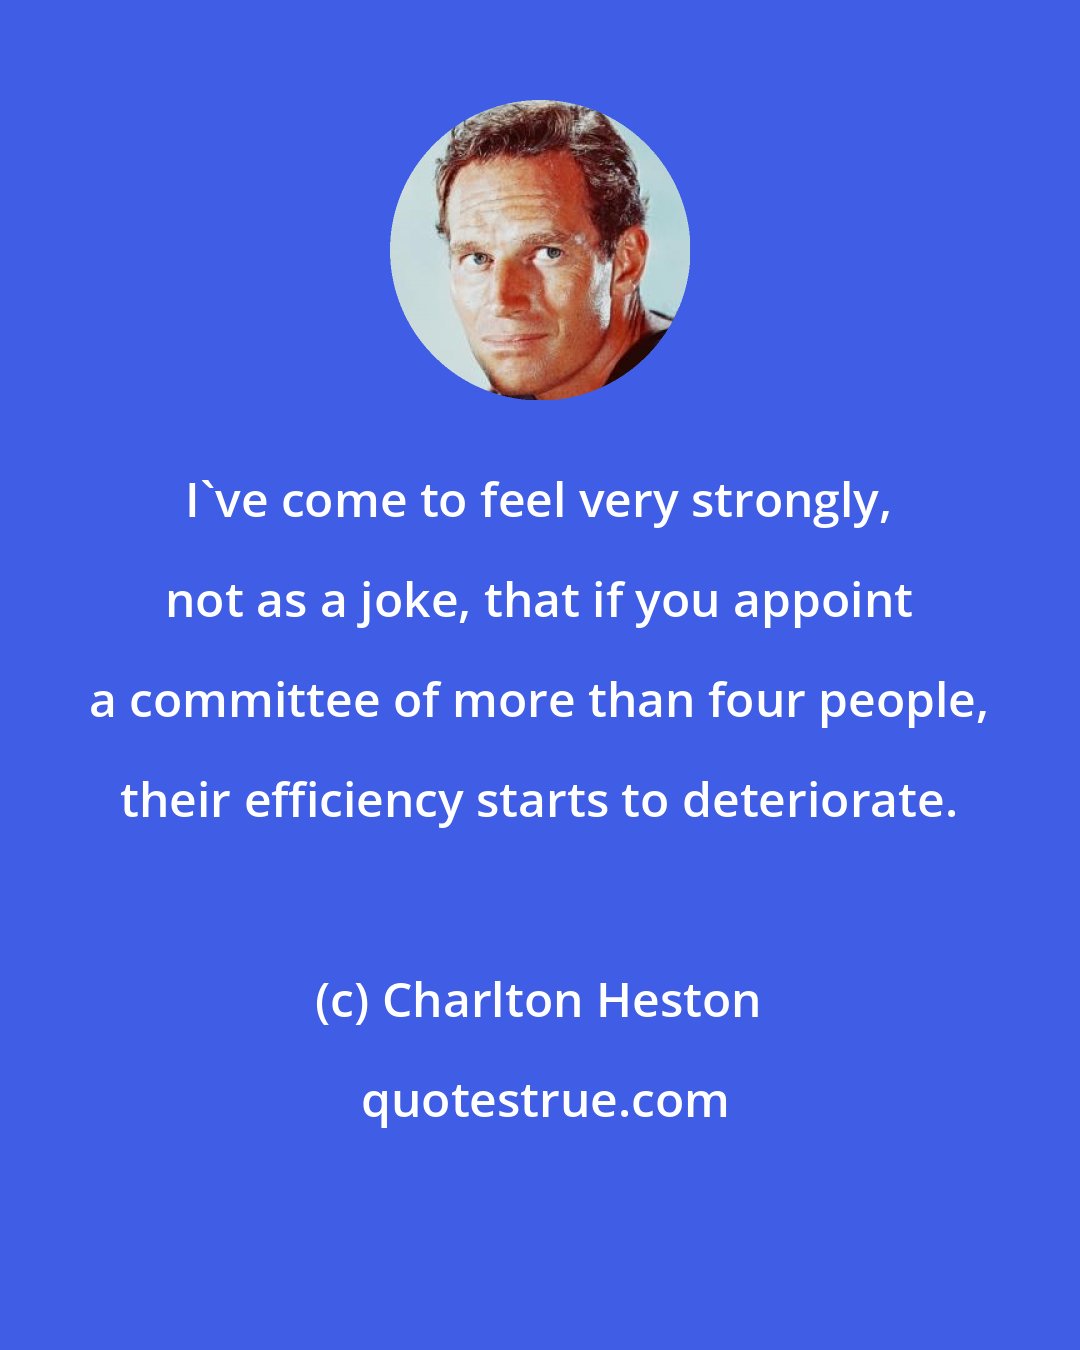 Charlton Heston: I've come to feel very strongly, not as a joke, that if you appoint a committee of more than four people, their efficiency starts to deteriorate.